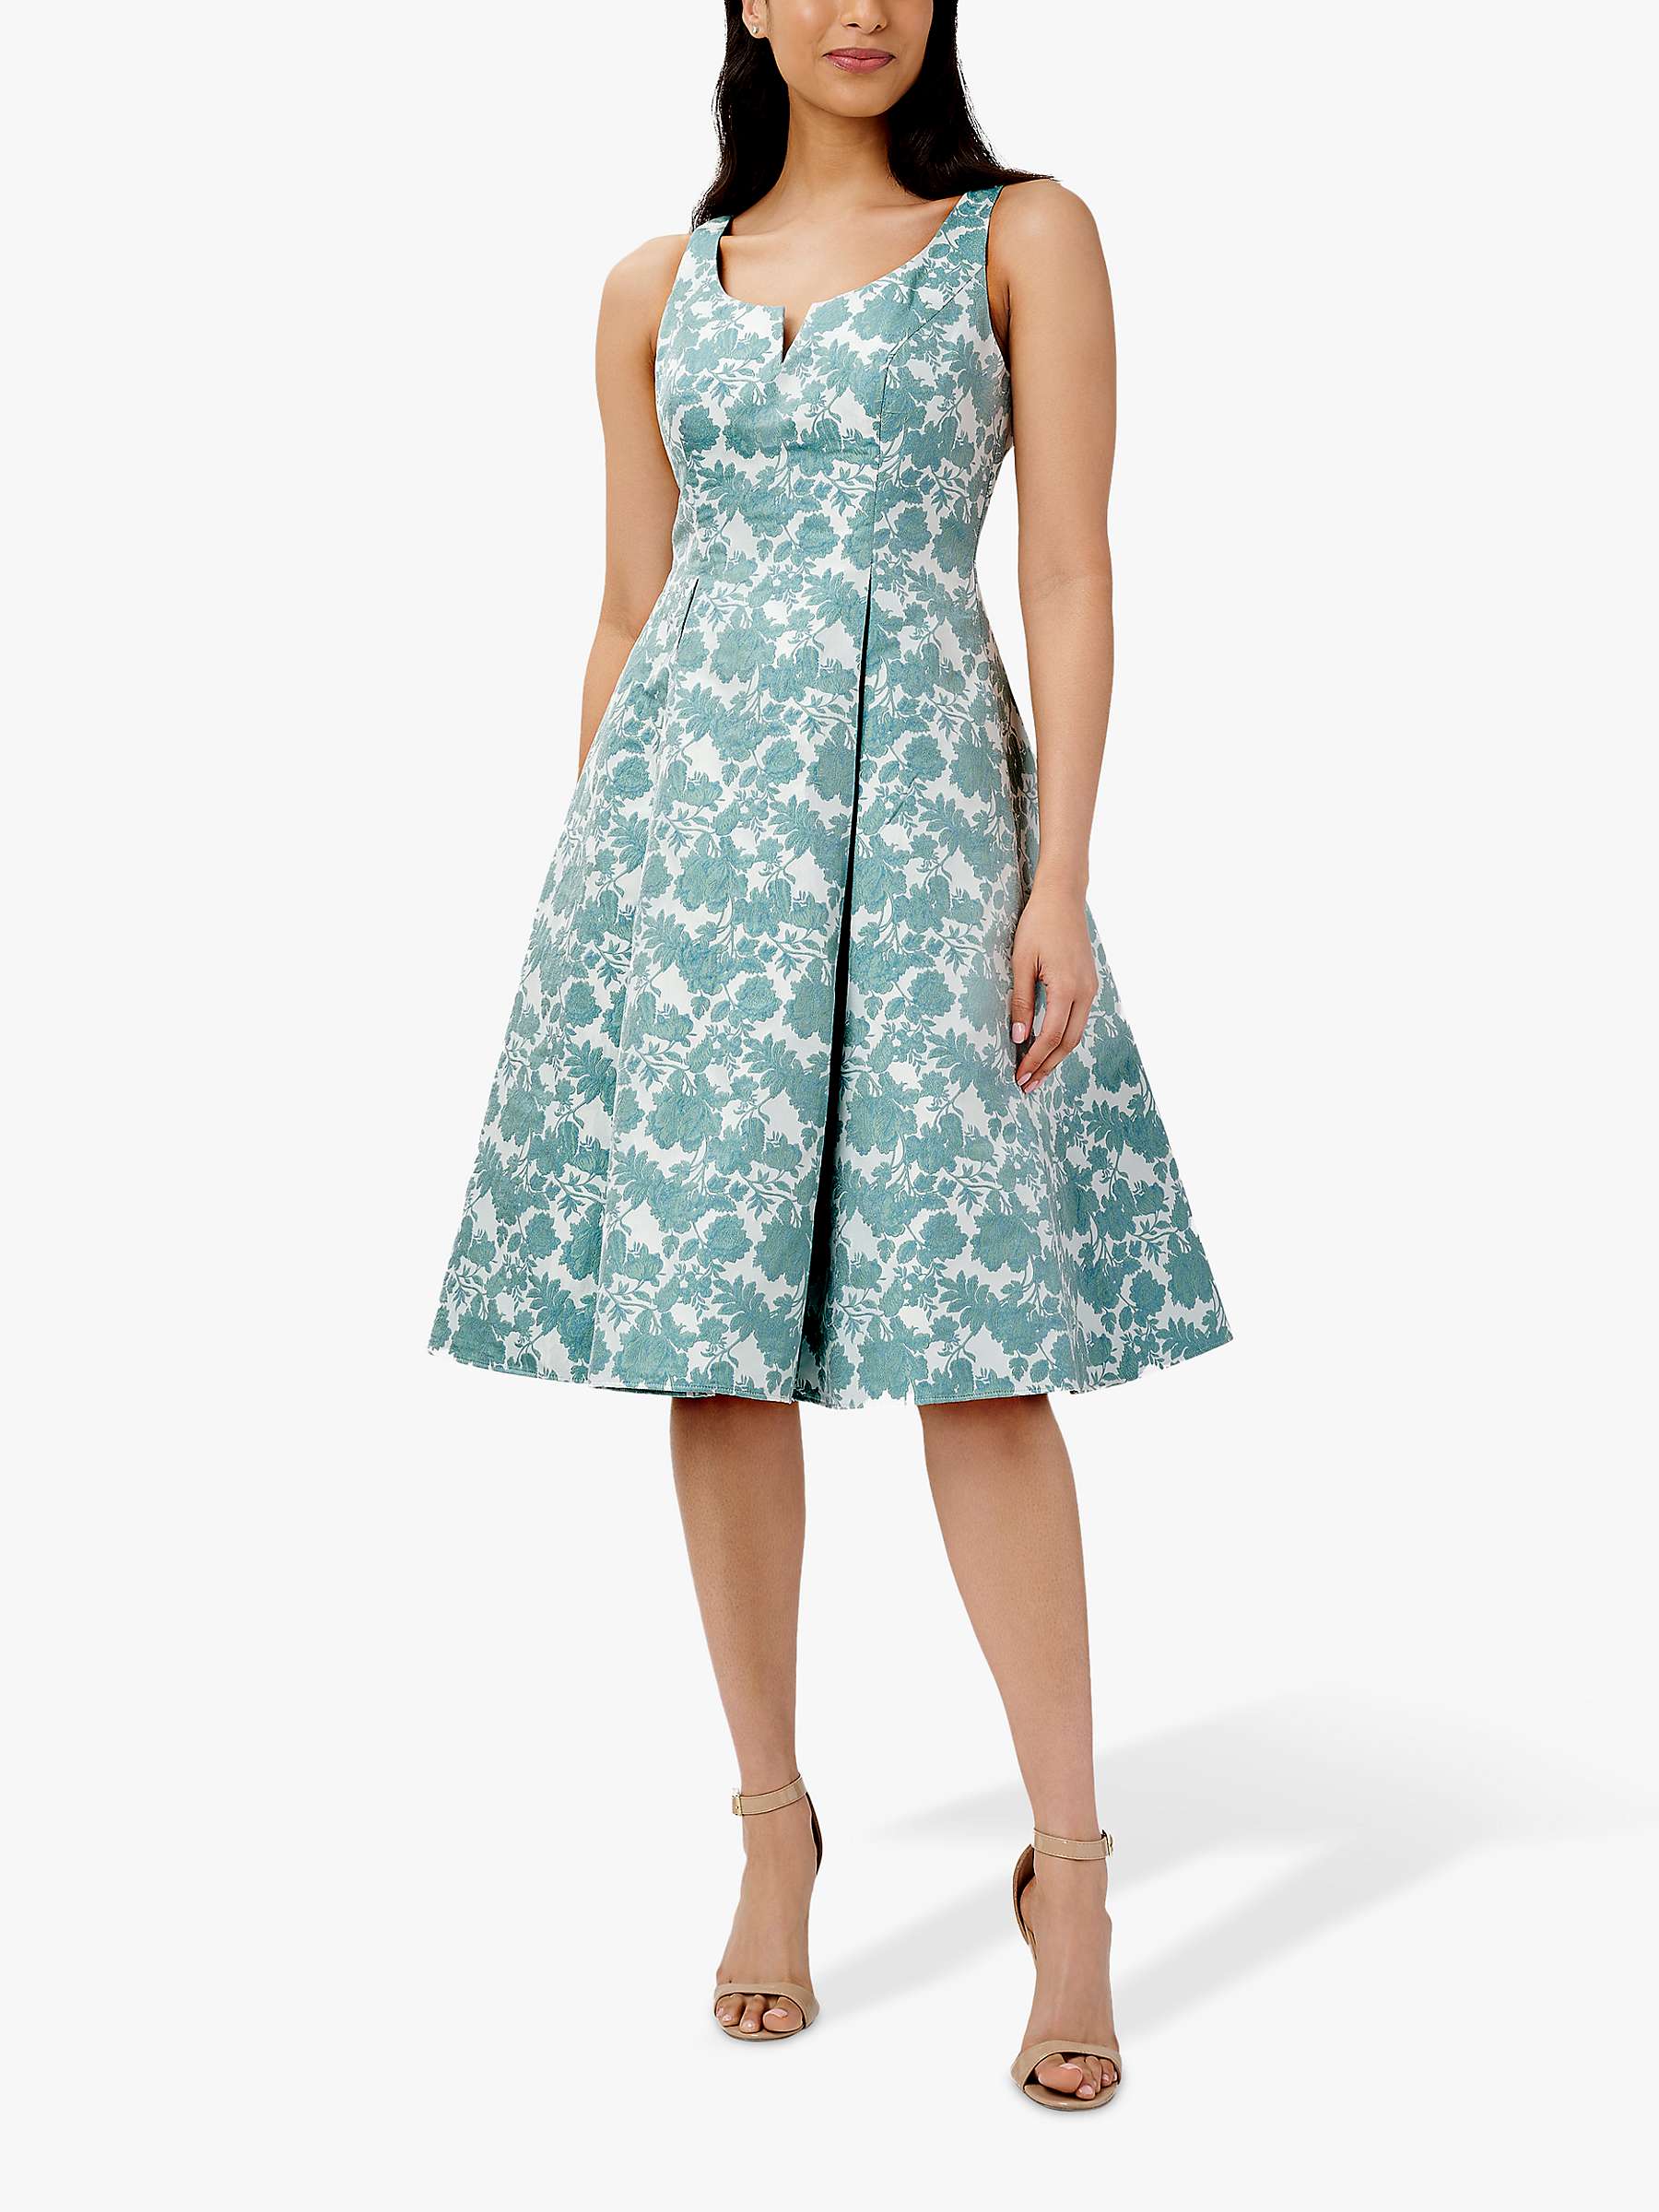 Buy Adrianna Papell Jacquard Fit and Flare Sleeveless Dress, Mint/Multi Online at johnlewis.com